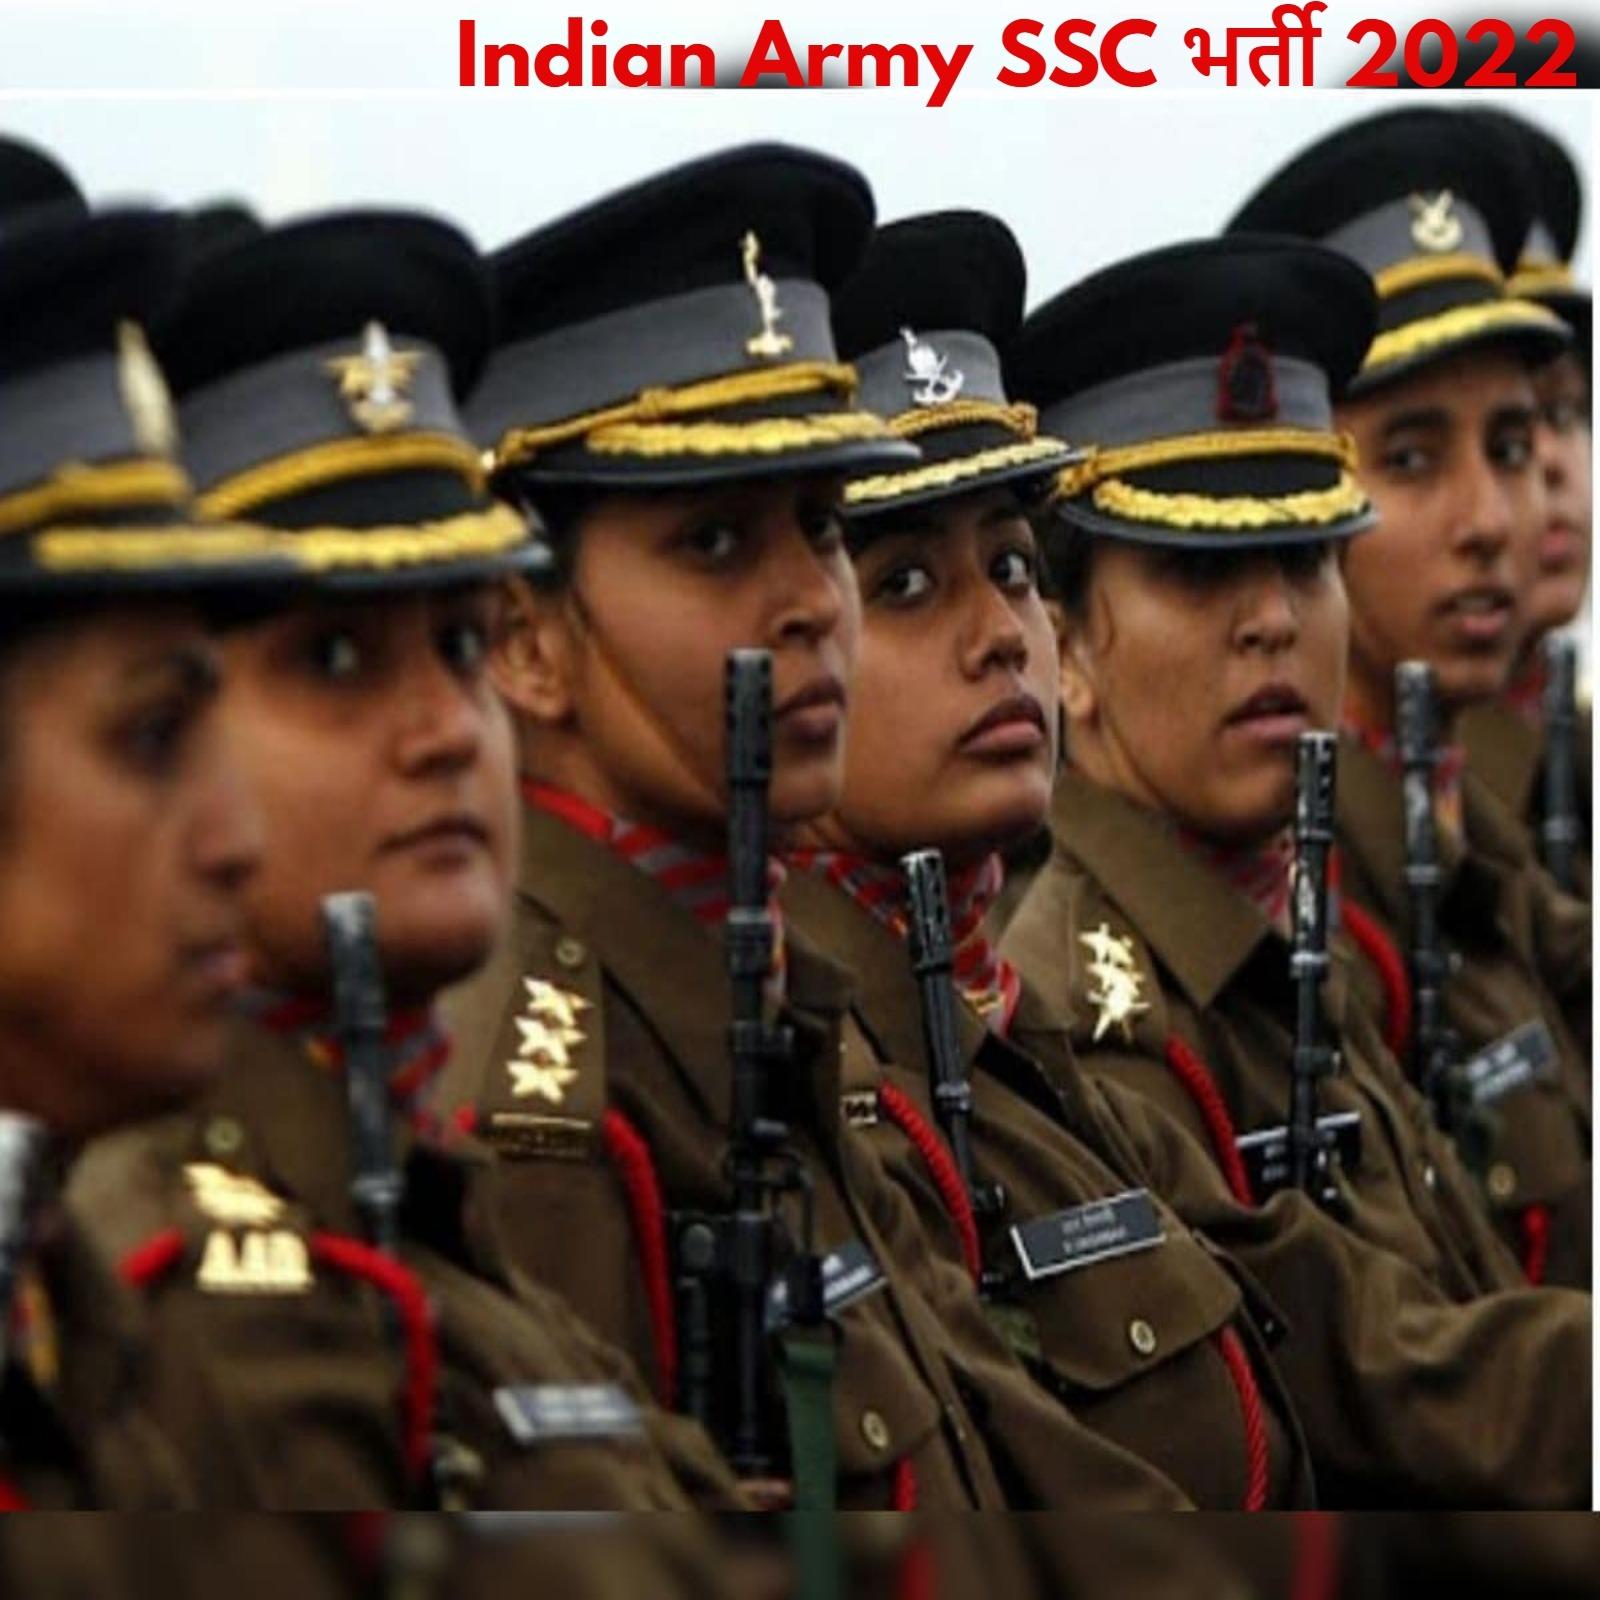 Indian Army SSC Tech Officer: Salary, Job Profile, Eligibility and More